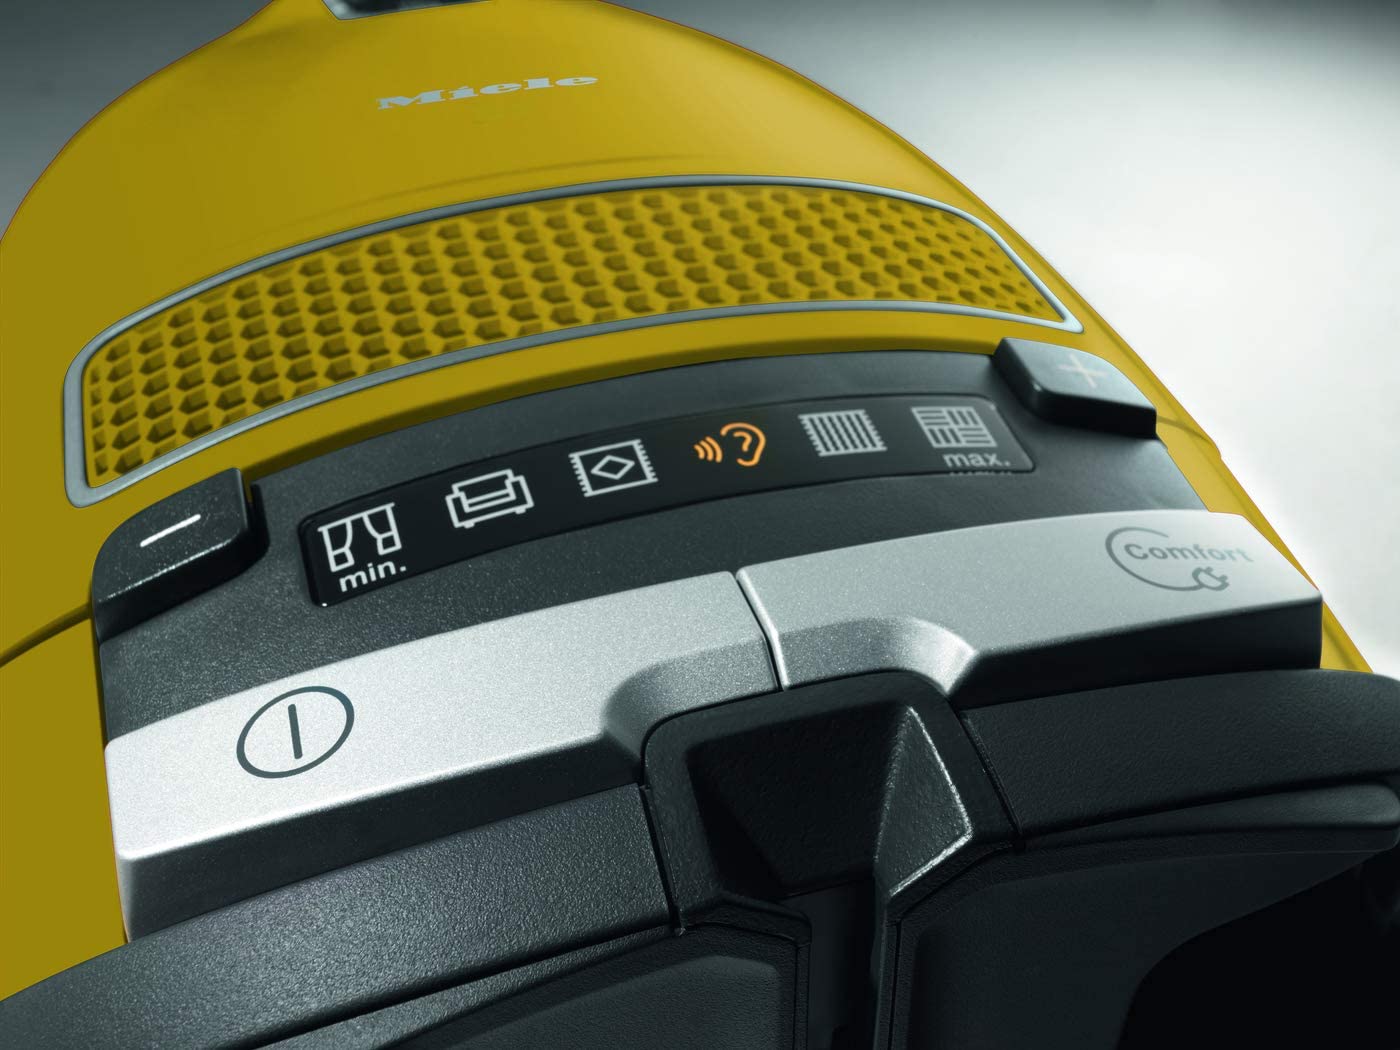 Miele Bagged Vacuum Cleaner Complete C3 Allergy With Hepa Filter, Captures 99.95% Of DUSt, Curry Yellow.